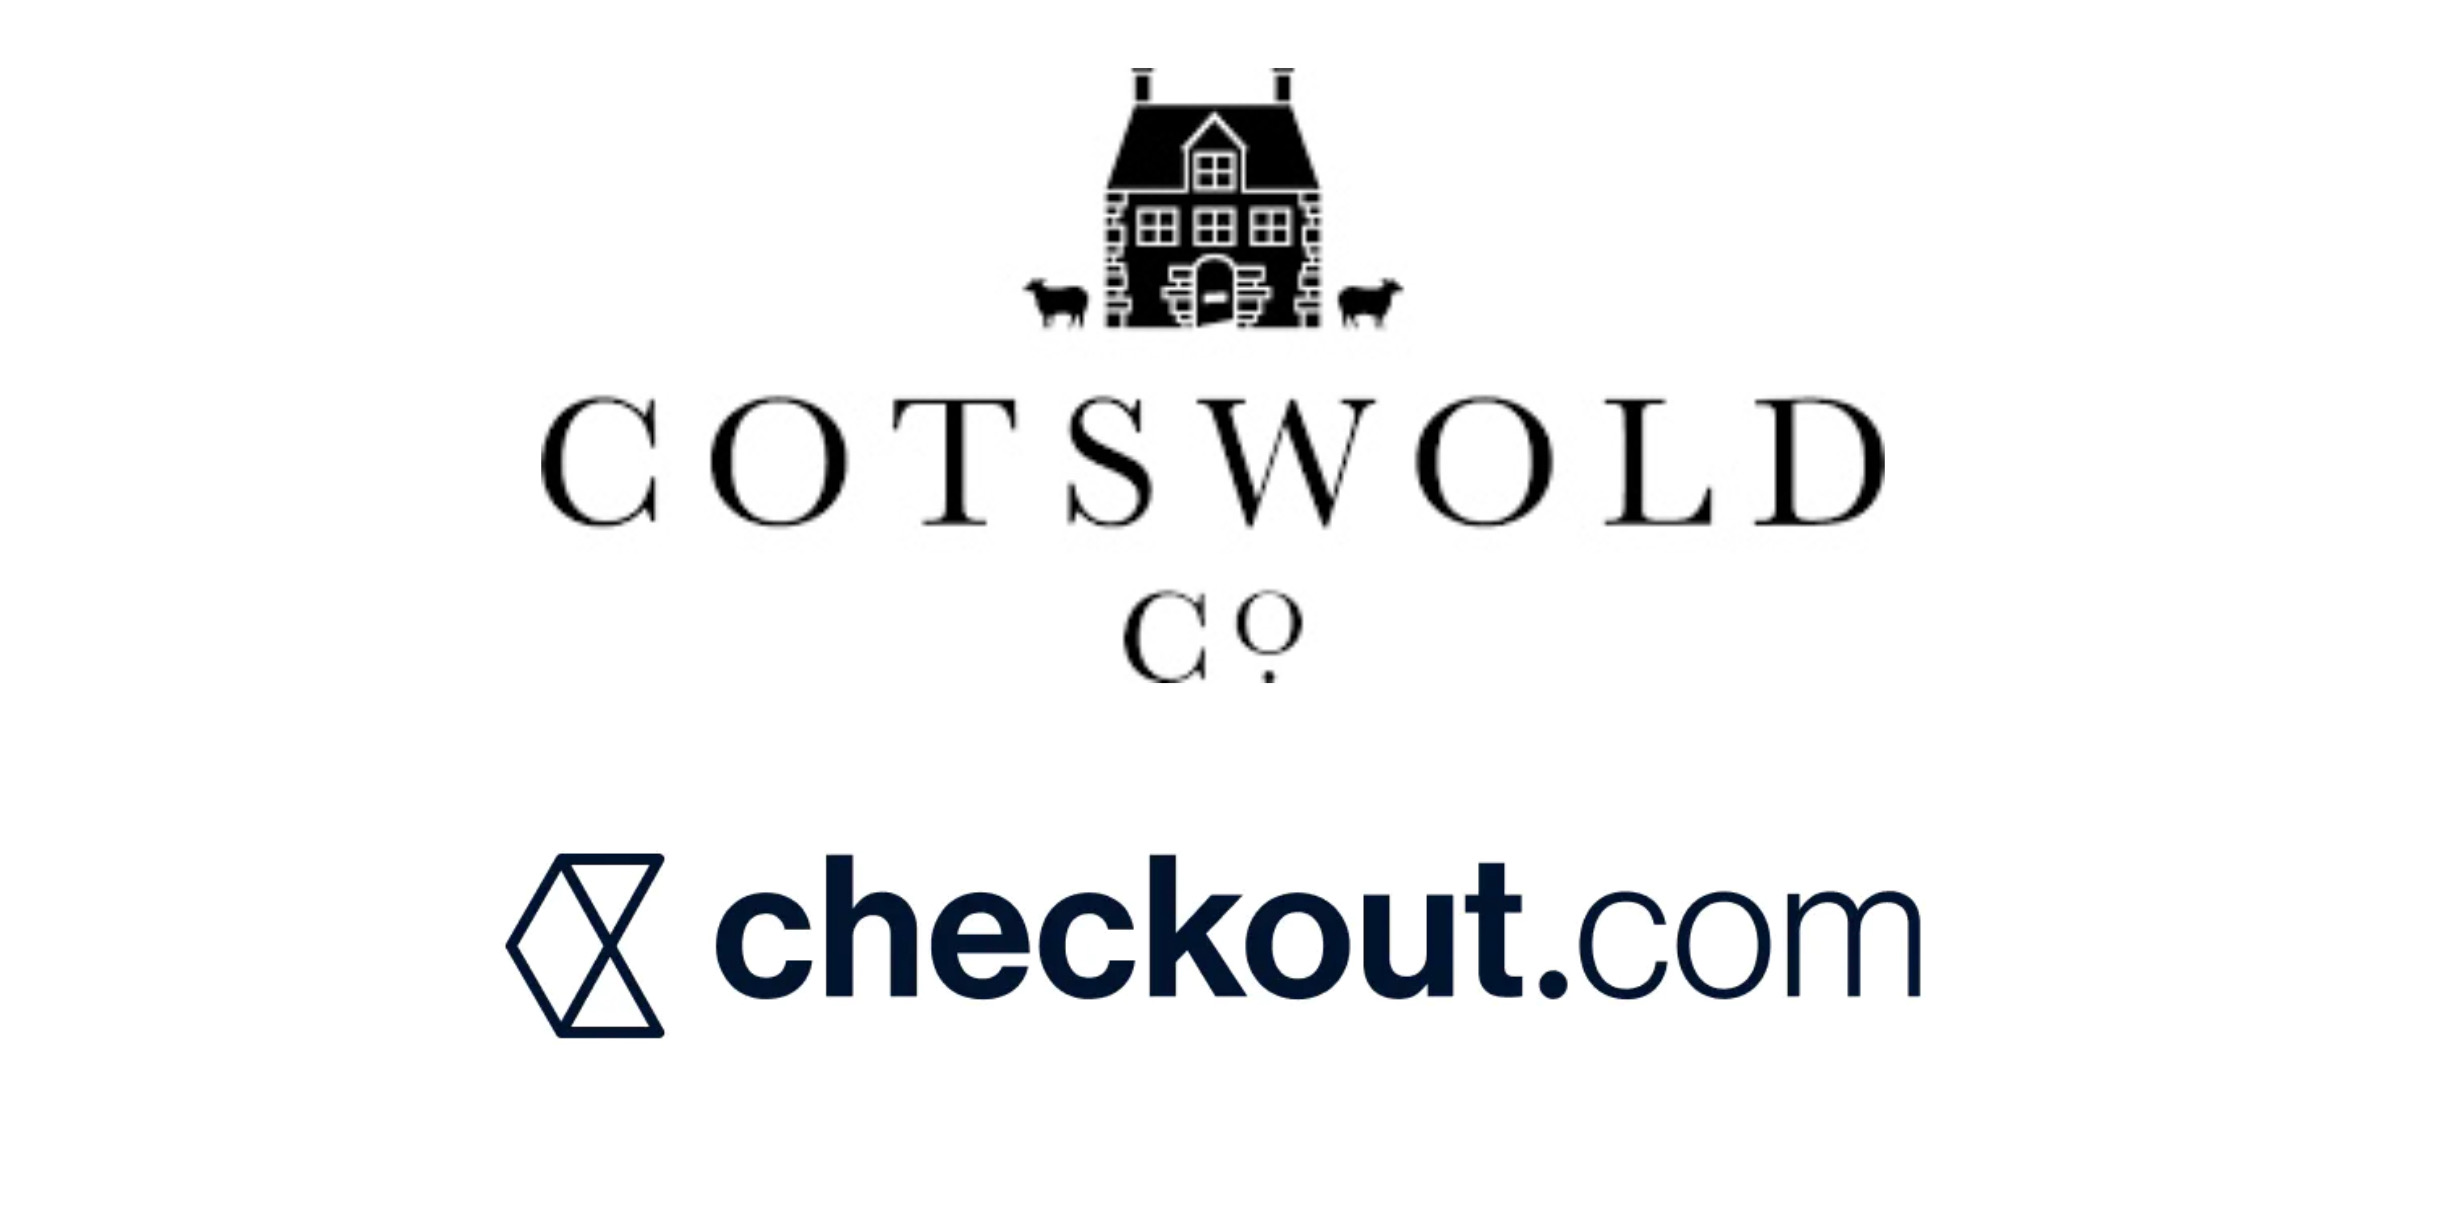 Cotswold Company Chooses Checkout.com as Its Payments Partner to Support Online Sales Boom